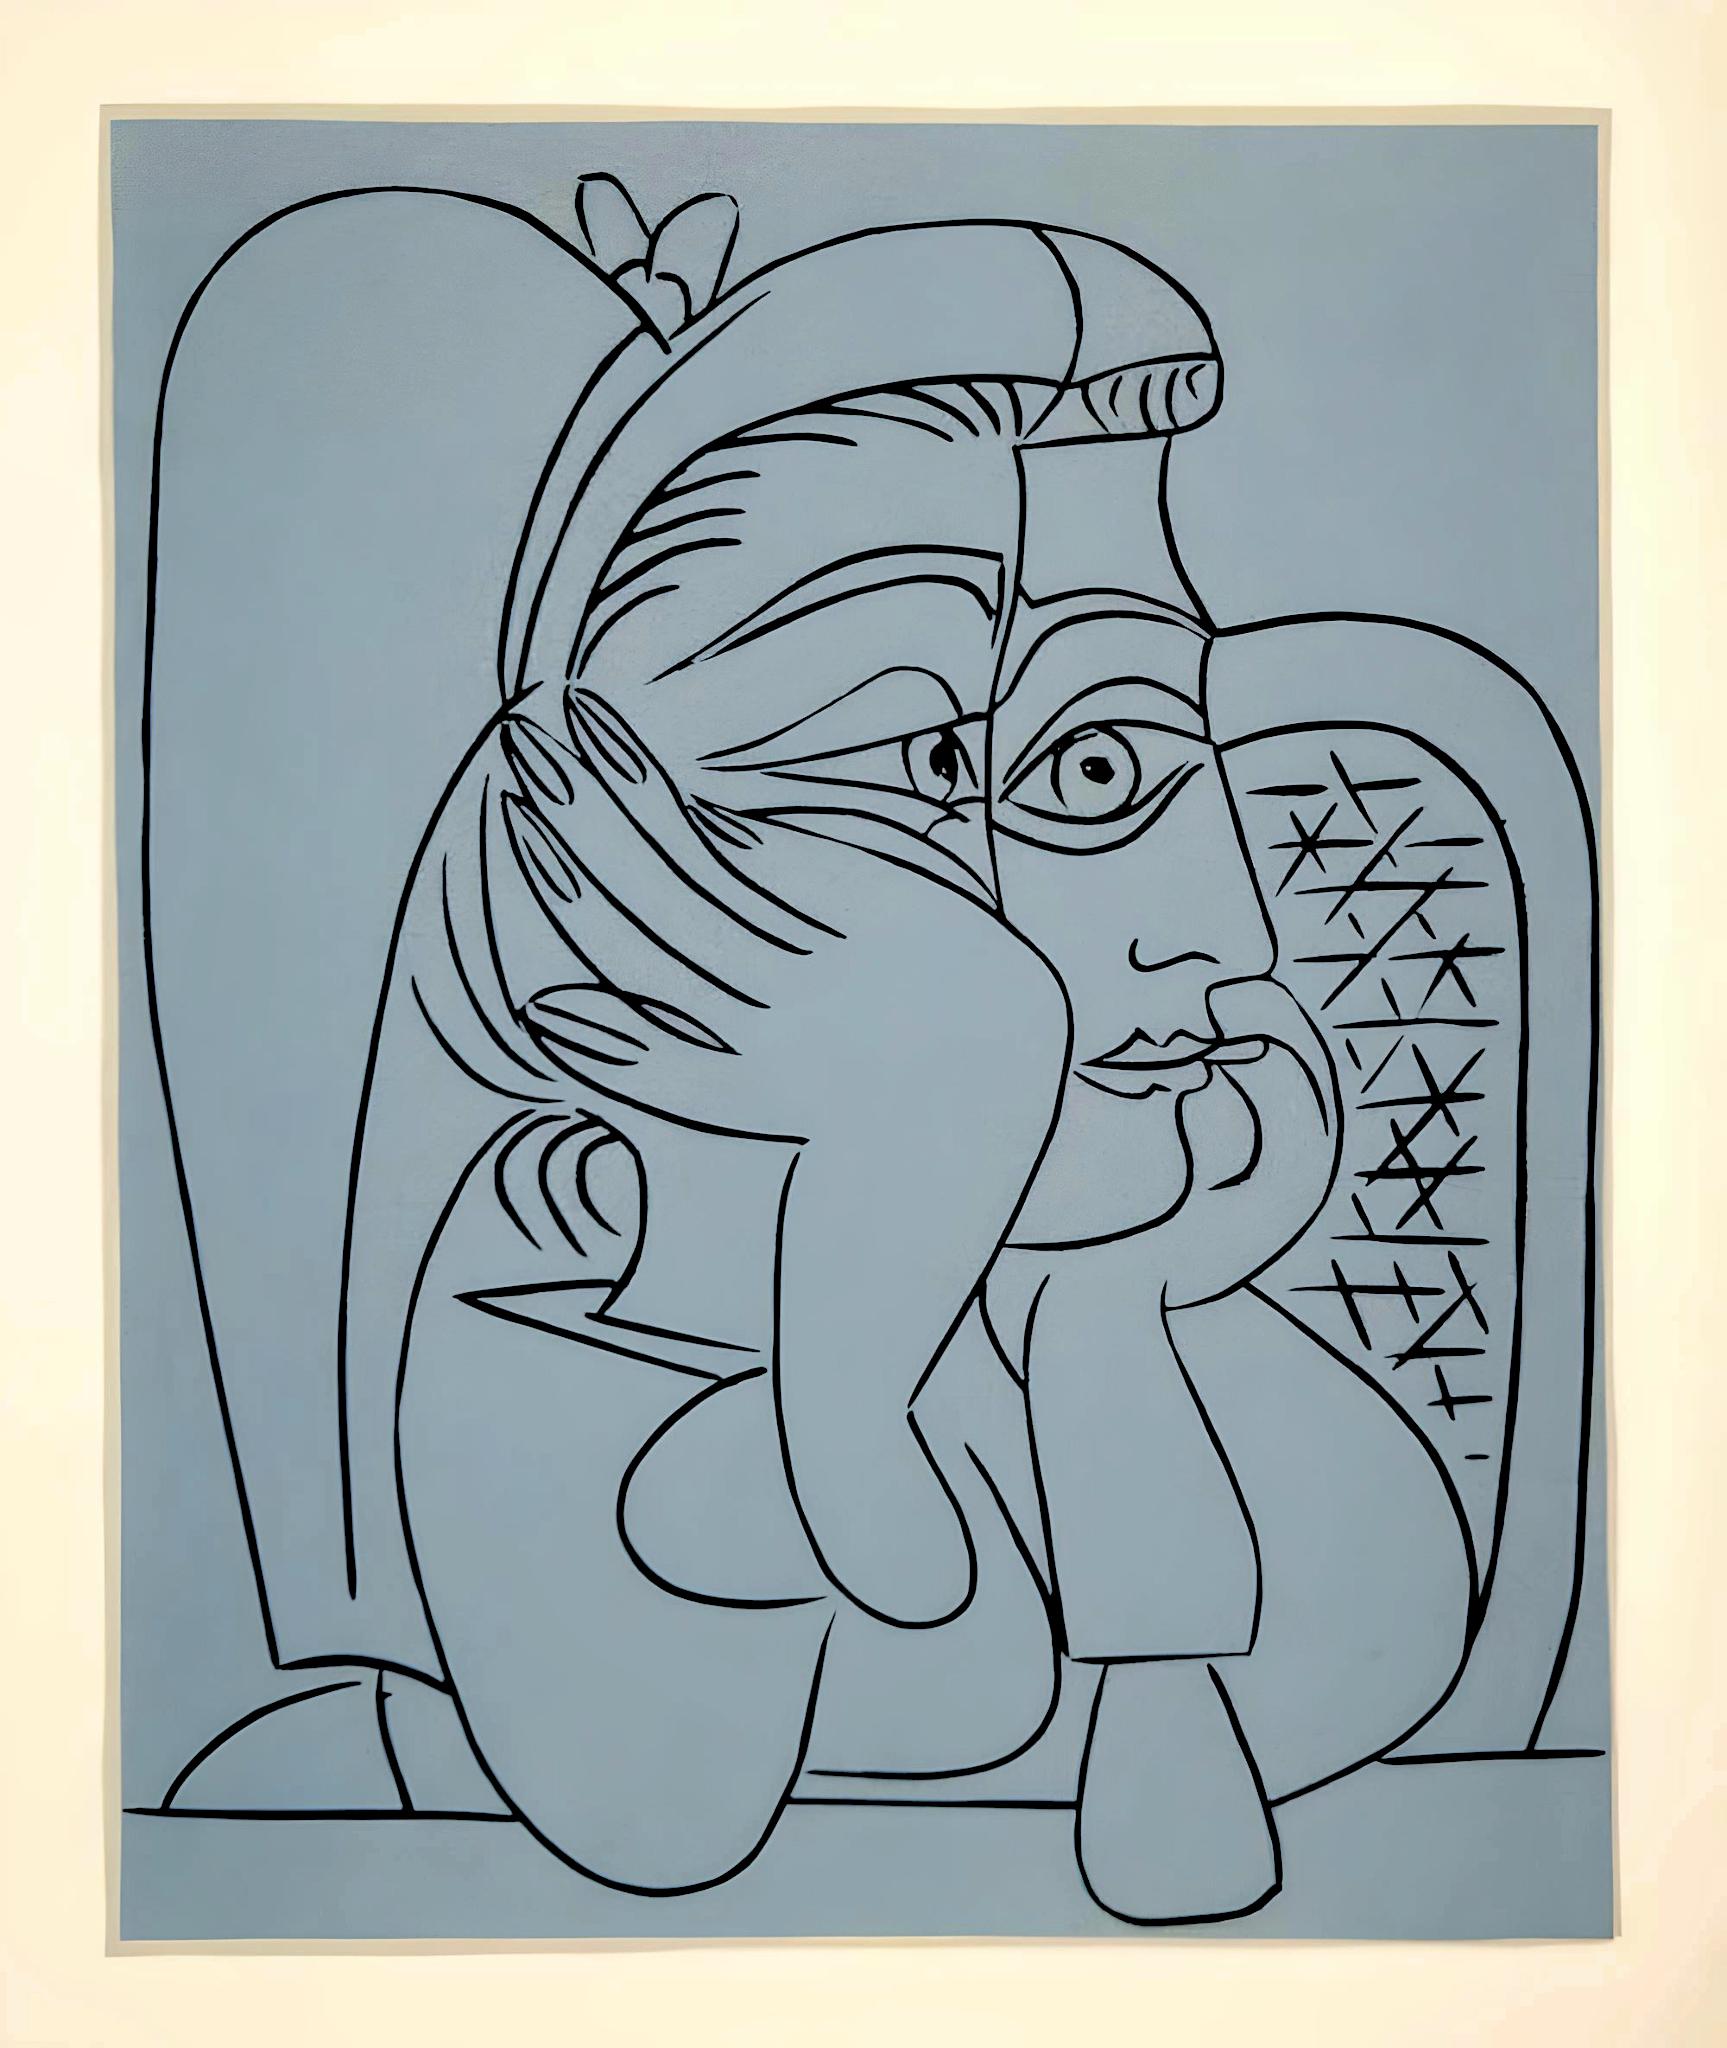 Picasso, Jacqueline Leaning on Her Elbows, Éditions Cercle d’Art (after) - Cubist Print by Pablo Picasso